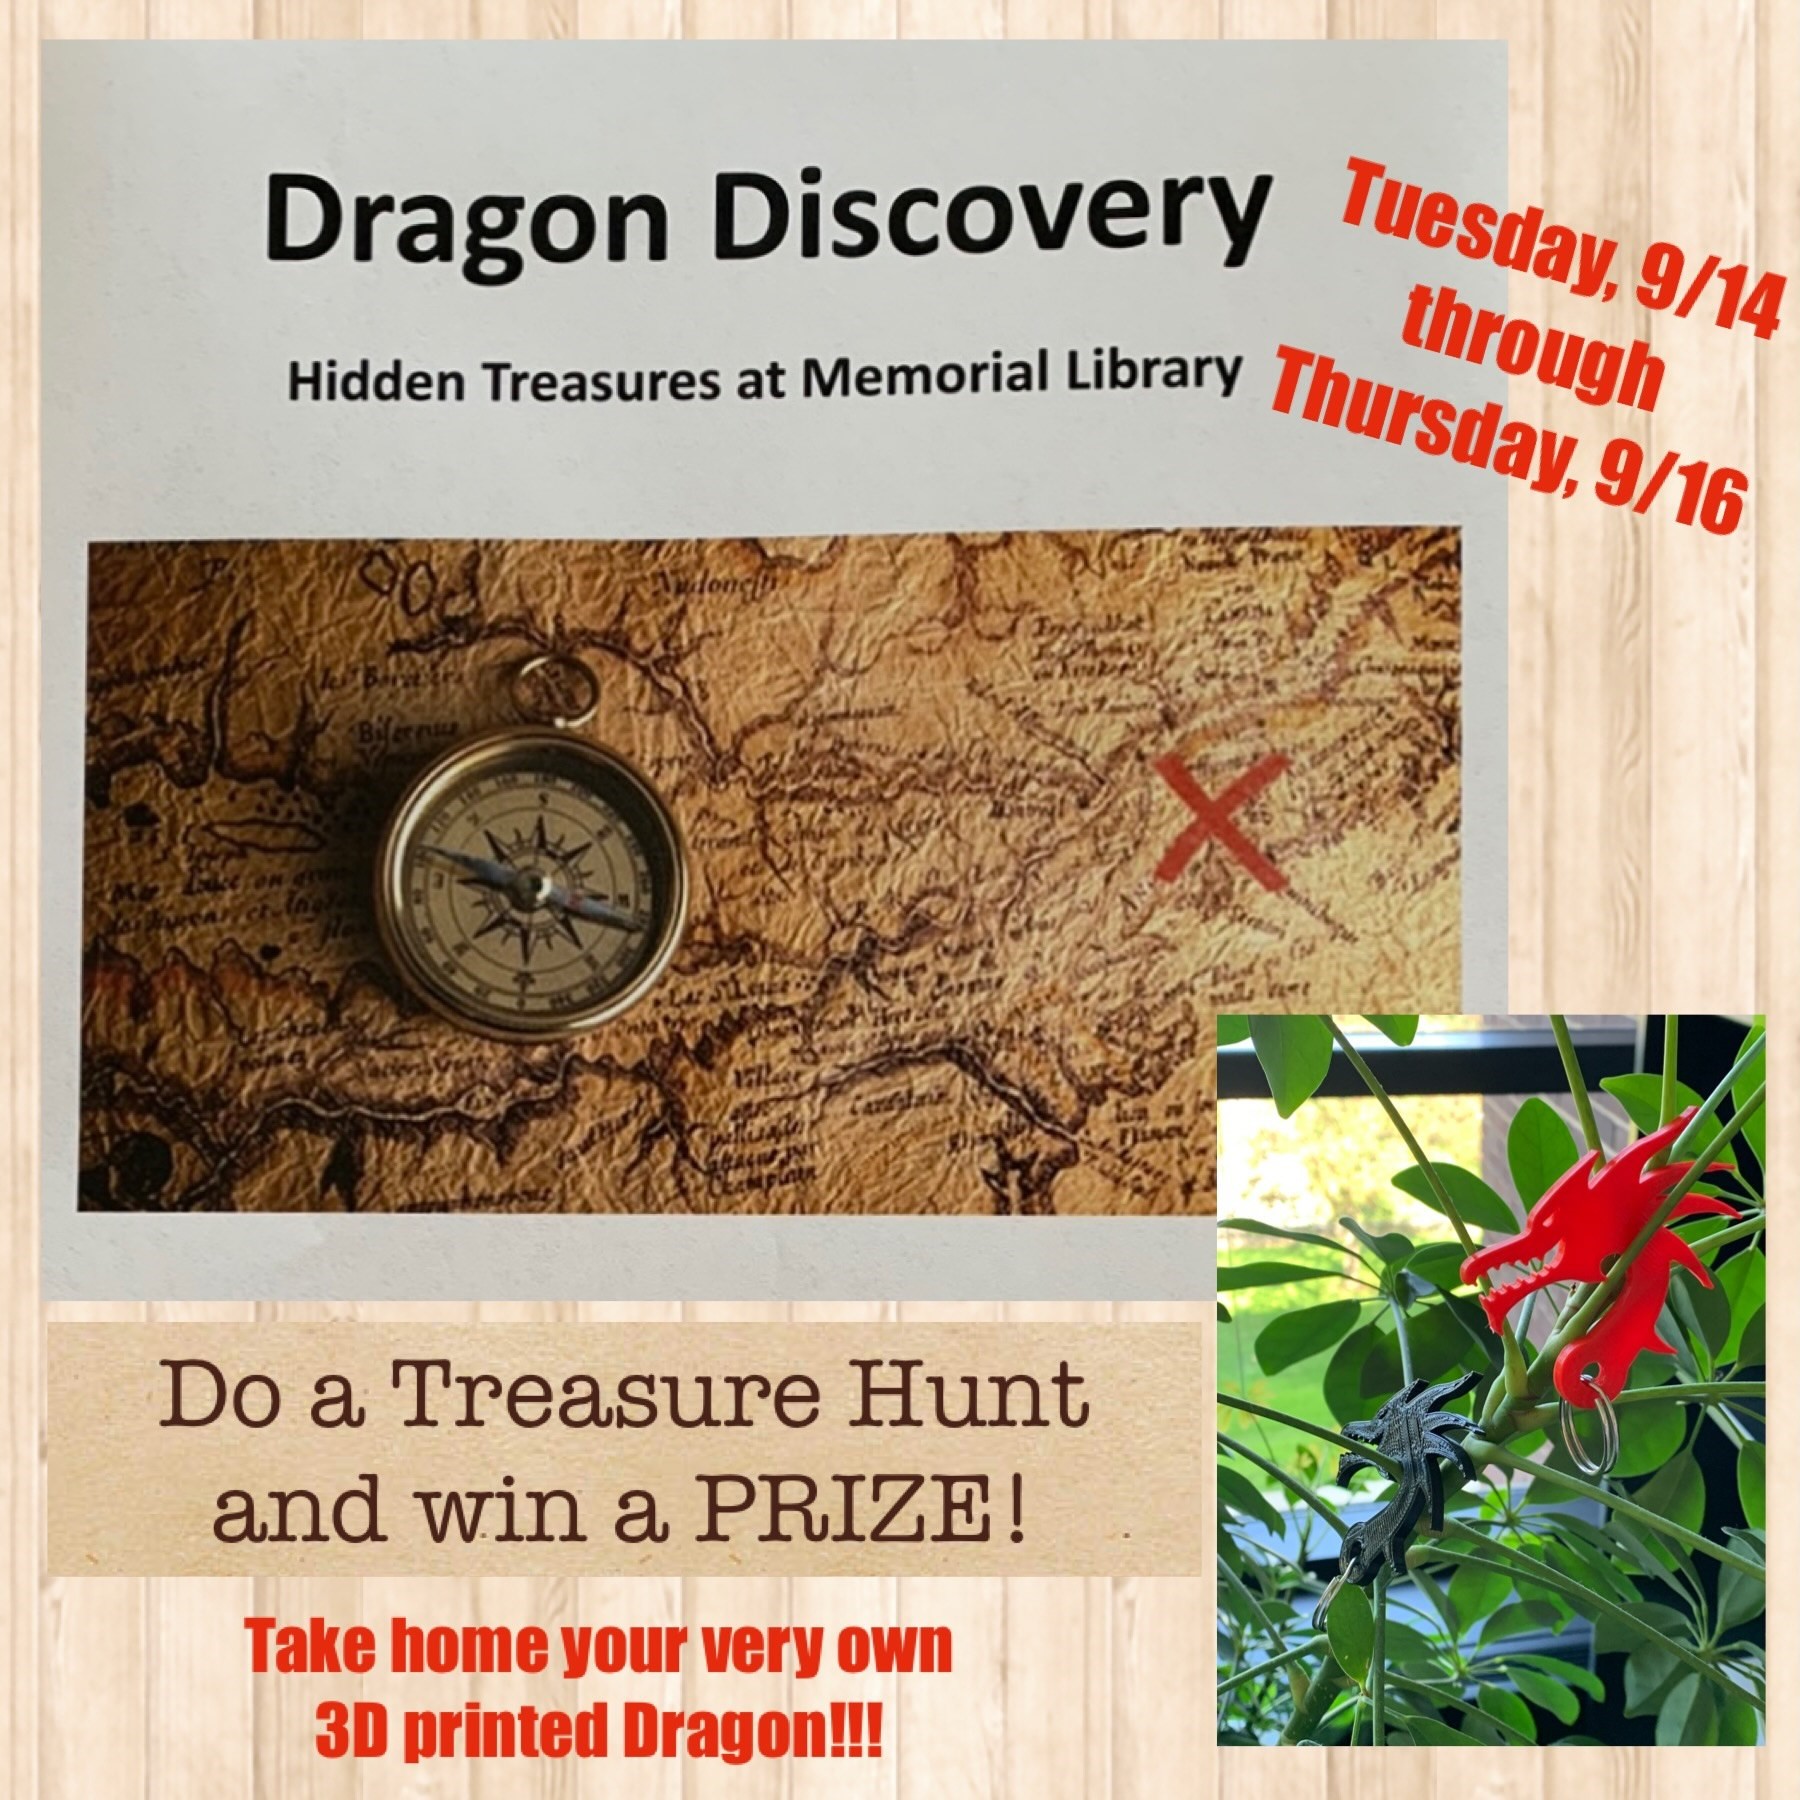 Image advertising the Library’s Dragon Discovery Treasure Hunt: 9/14-9:16. Win a 3D printed dragon